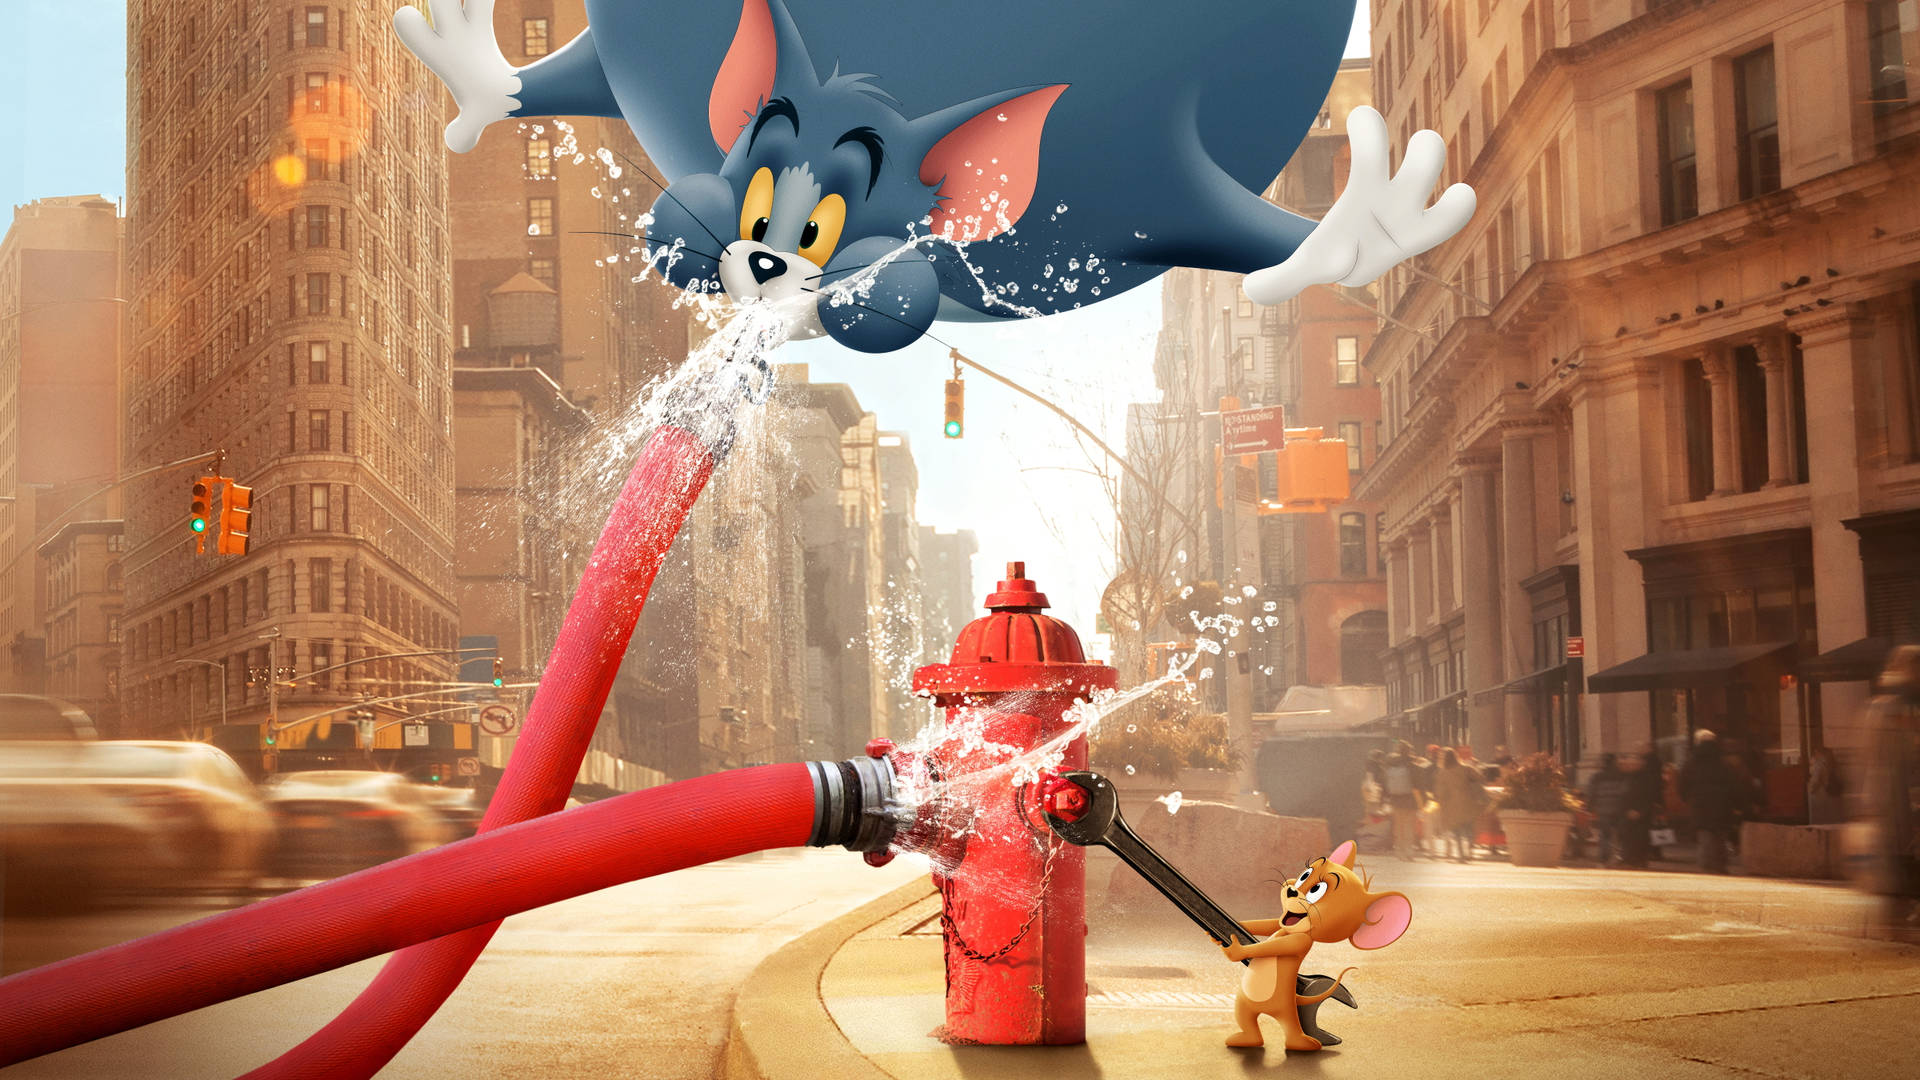 Fire Hydrant Fight Of Tom And Jerry Aesthetic Background